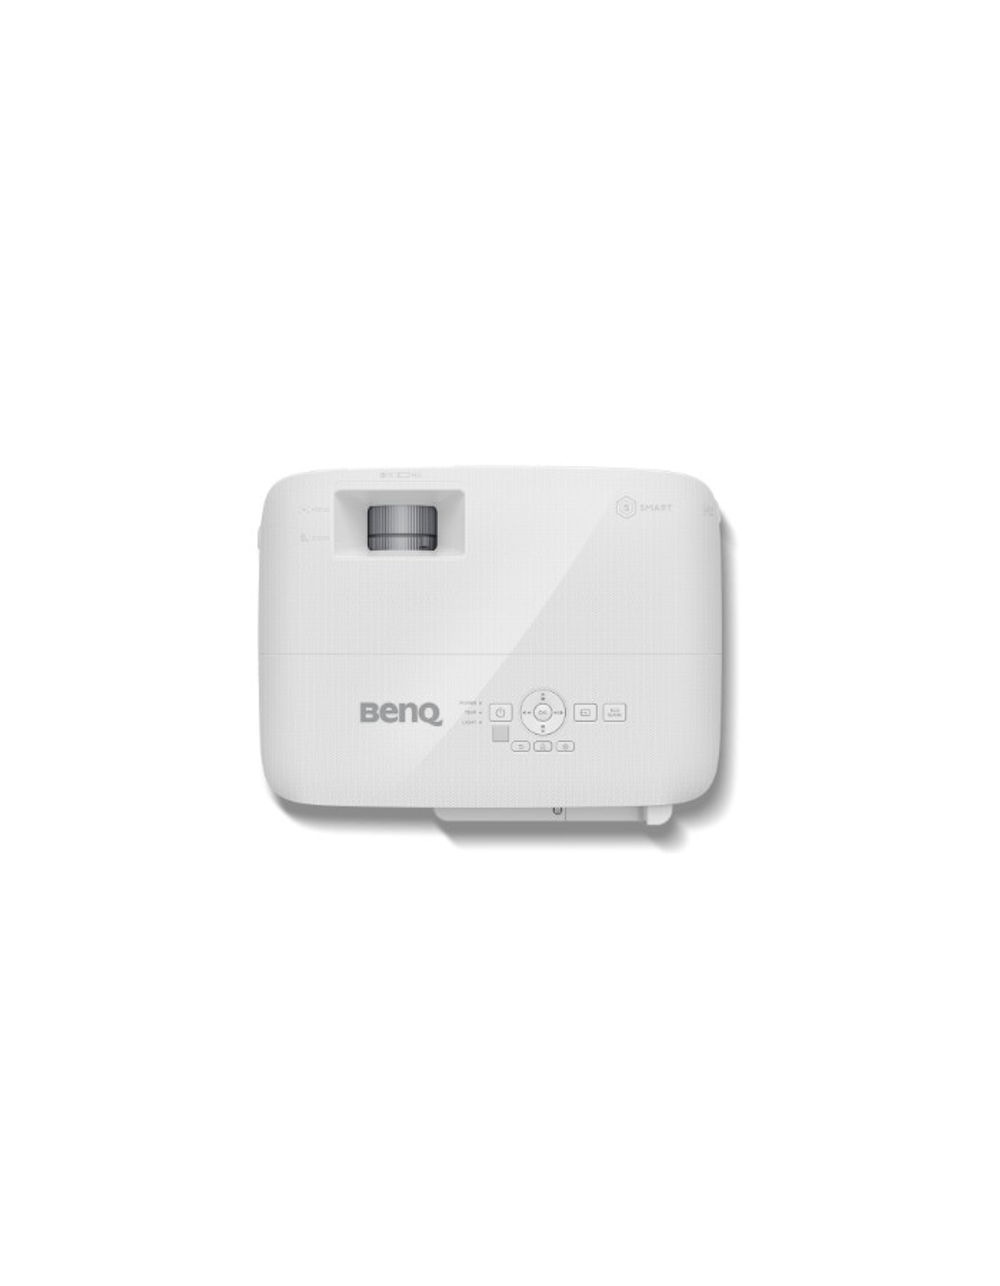 BenQ EW600 [9H.JLT77.13E] (DLP, 1280x800 WXGA, 3600 AL SMART, 1.1X, TR 1.55~1.7, HDMIx1, VGA, USBx2, wireless projection, 5G WiFi/BT, (USB dongle WDR02U inc) Android, 16GB/2GB, White)